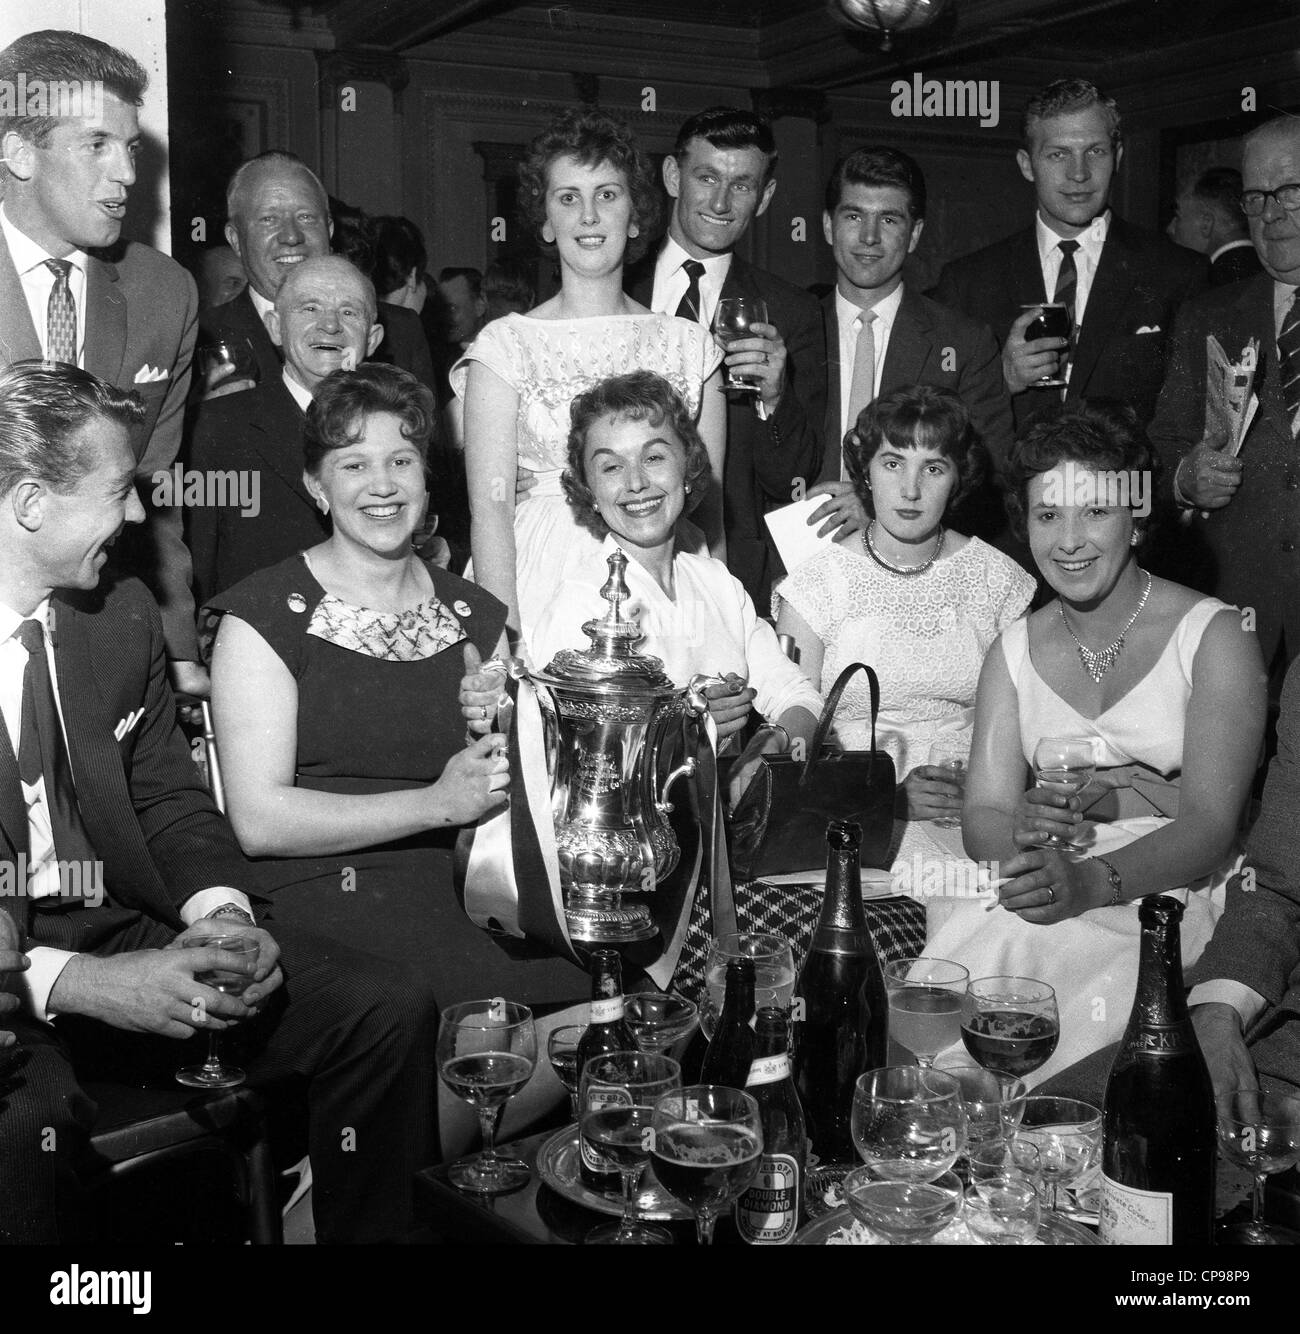 Wolverhampton Wanderers footballers celebrating 1960 FA cup win at the Cafe Royal with their wives. LtoR Peter Broadbent, George Showell, Jimmy Murray, Des Horne, Malcolm Finlayson. footballers wives partners Britain 1960s celebration celebrations party Stock Photo